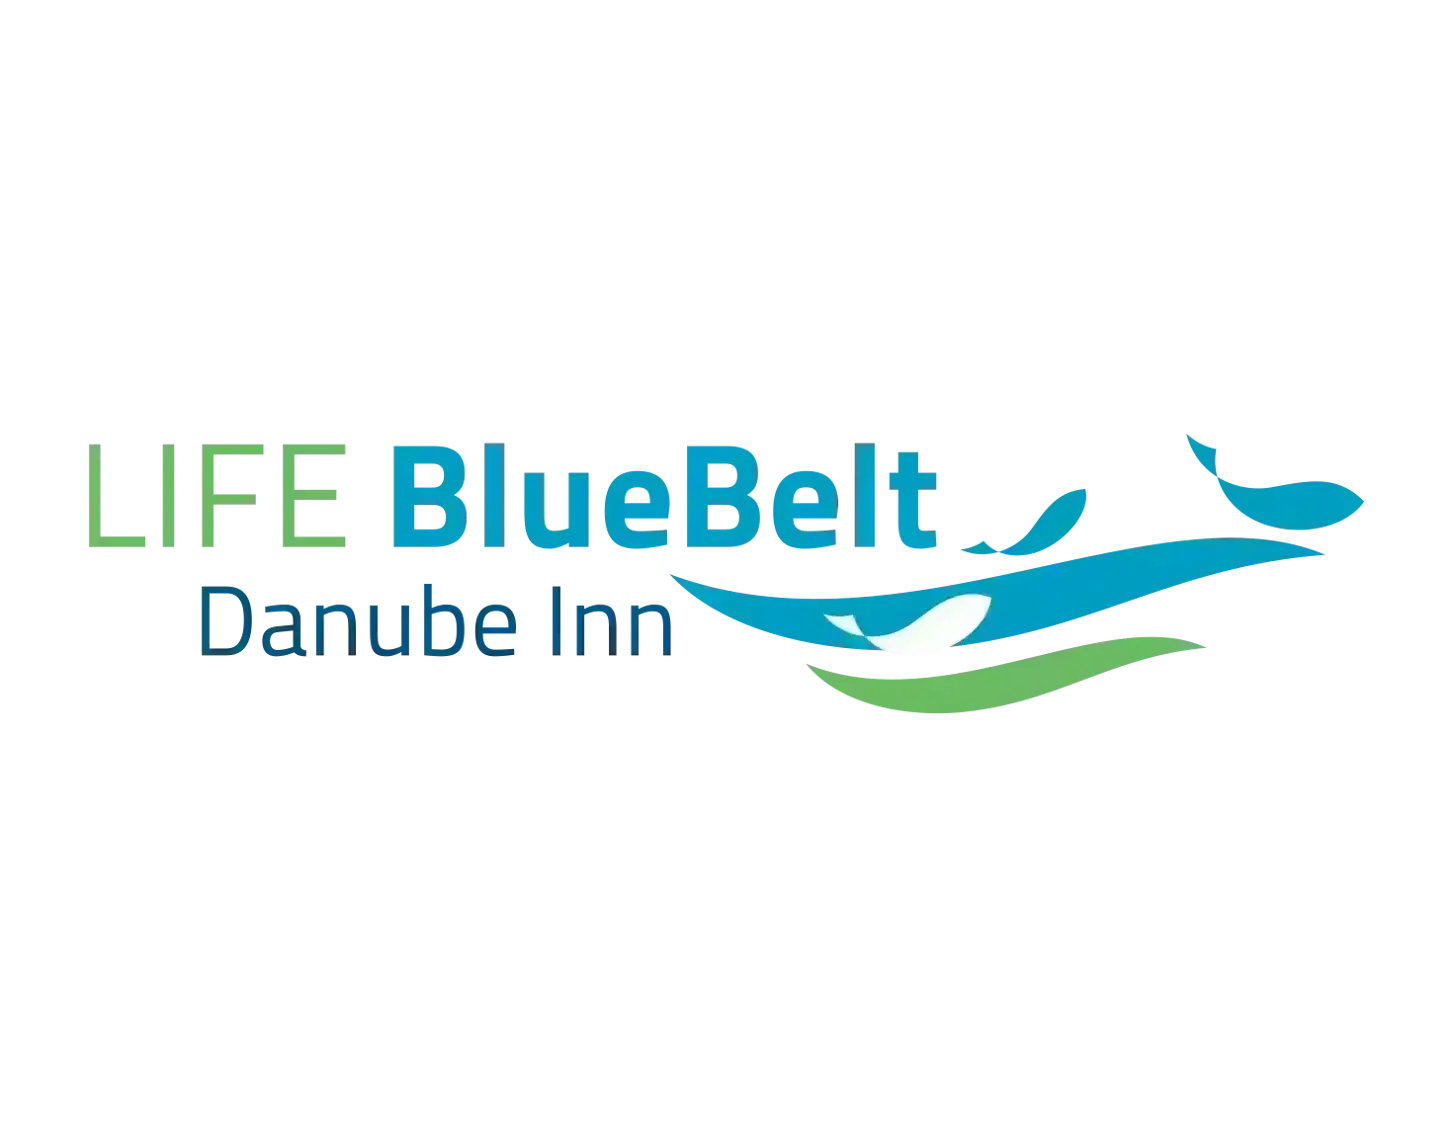 The logo of LIFE Blue Belt Danube Inn. LIFE is written in green, while Blue Belt is written in light blue and Danube Inn in dark blue below. To the right is a graphic with fish and waves in light blue and light green.